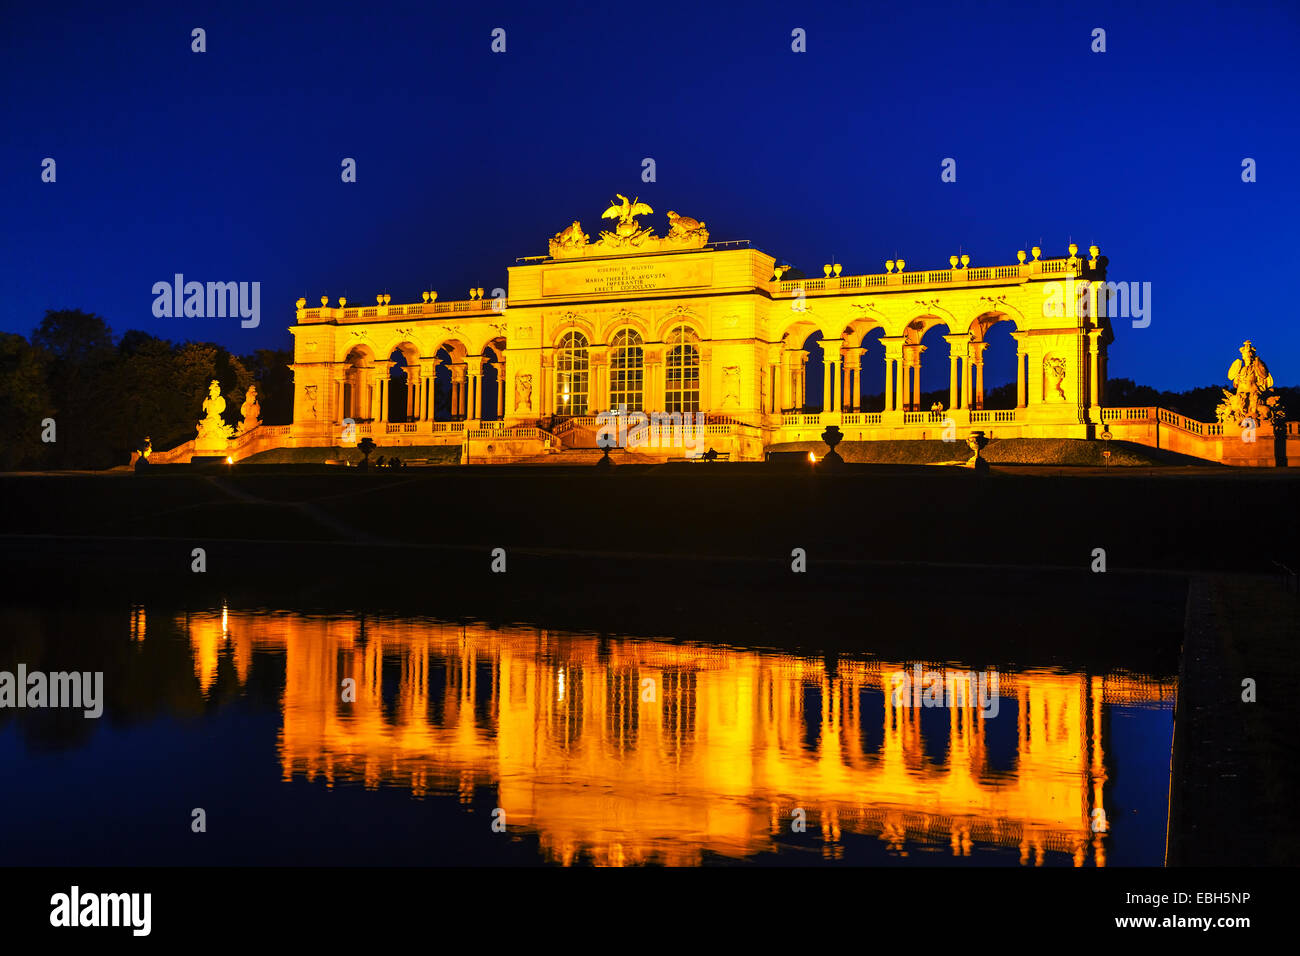 VIENNA - OCTOBER 19: Gloriette Schonbrunn at sunset with tourists on October 19, 2014 in Vienna. It's the largest gloriette in V Stock Photo